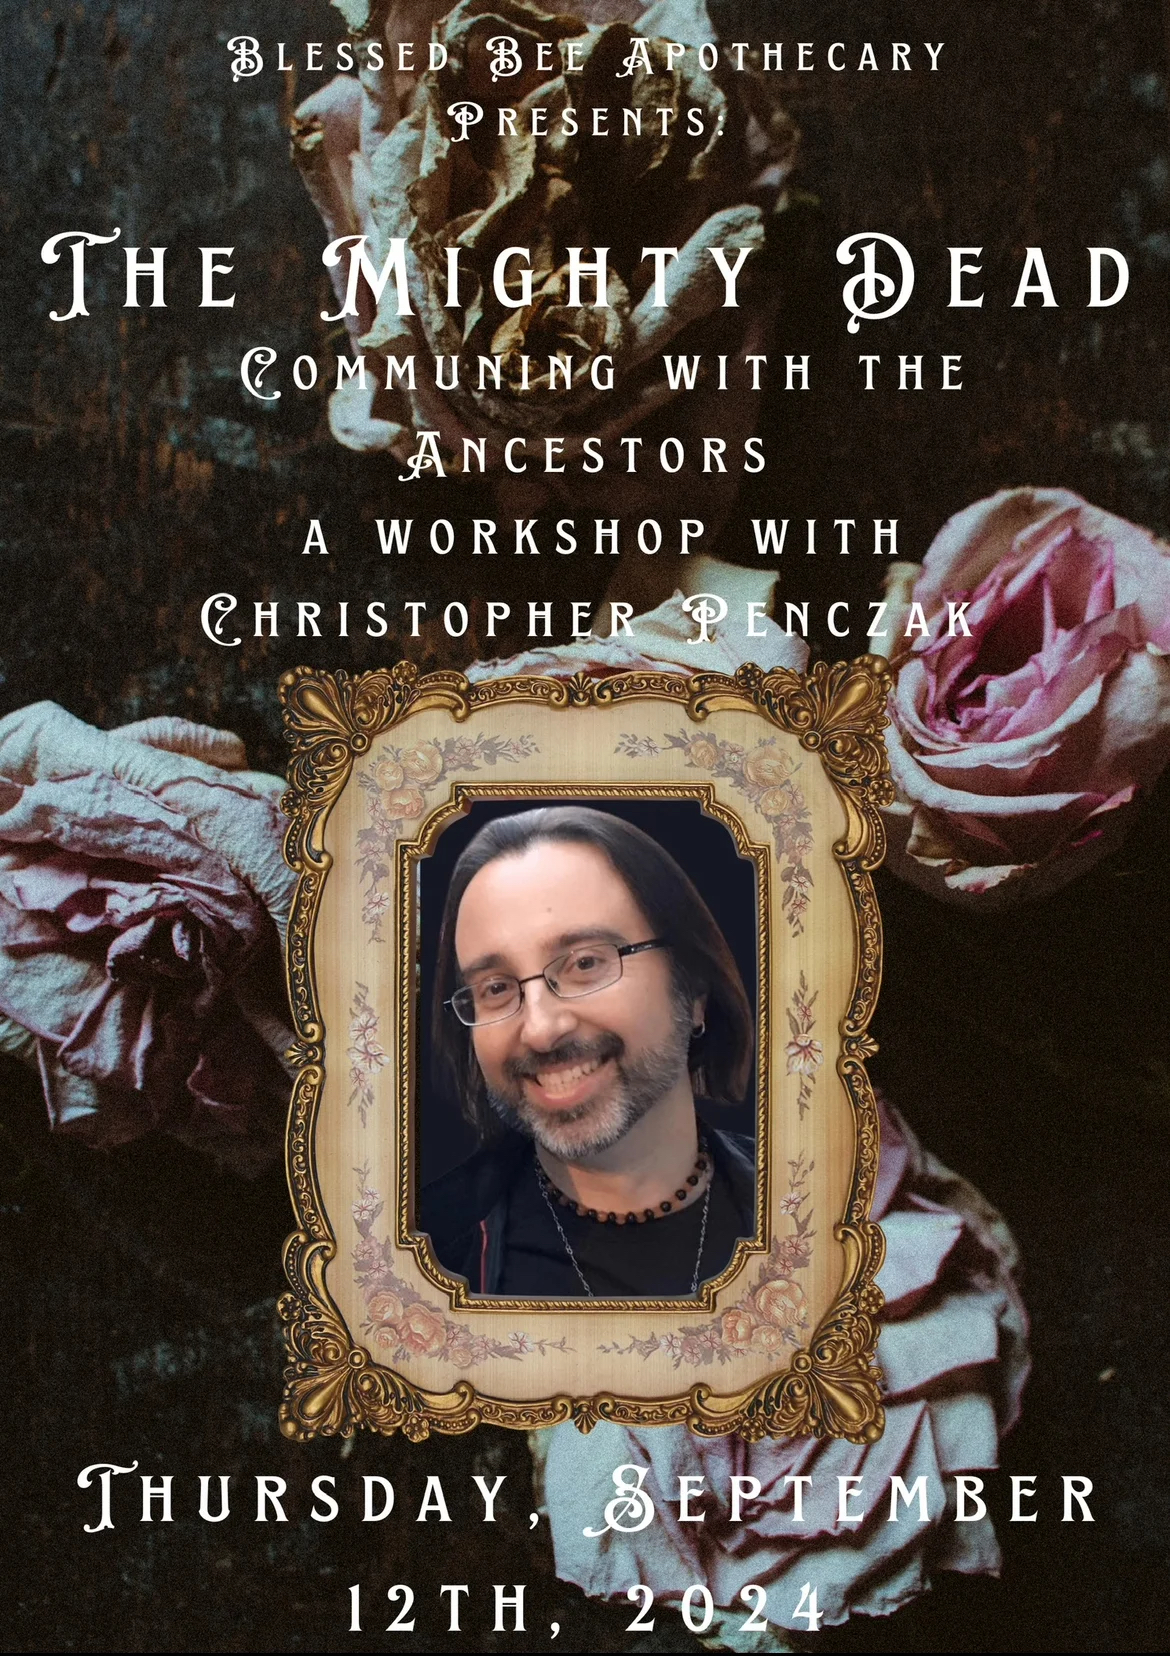 The Mighty Dead - Communing with the Ancestors